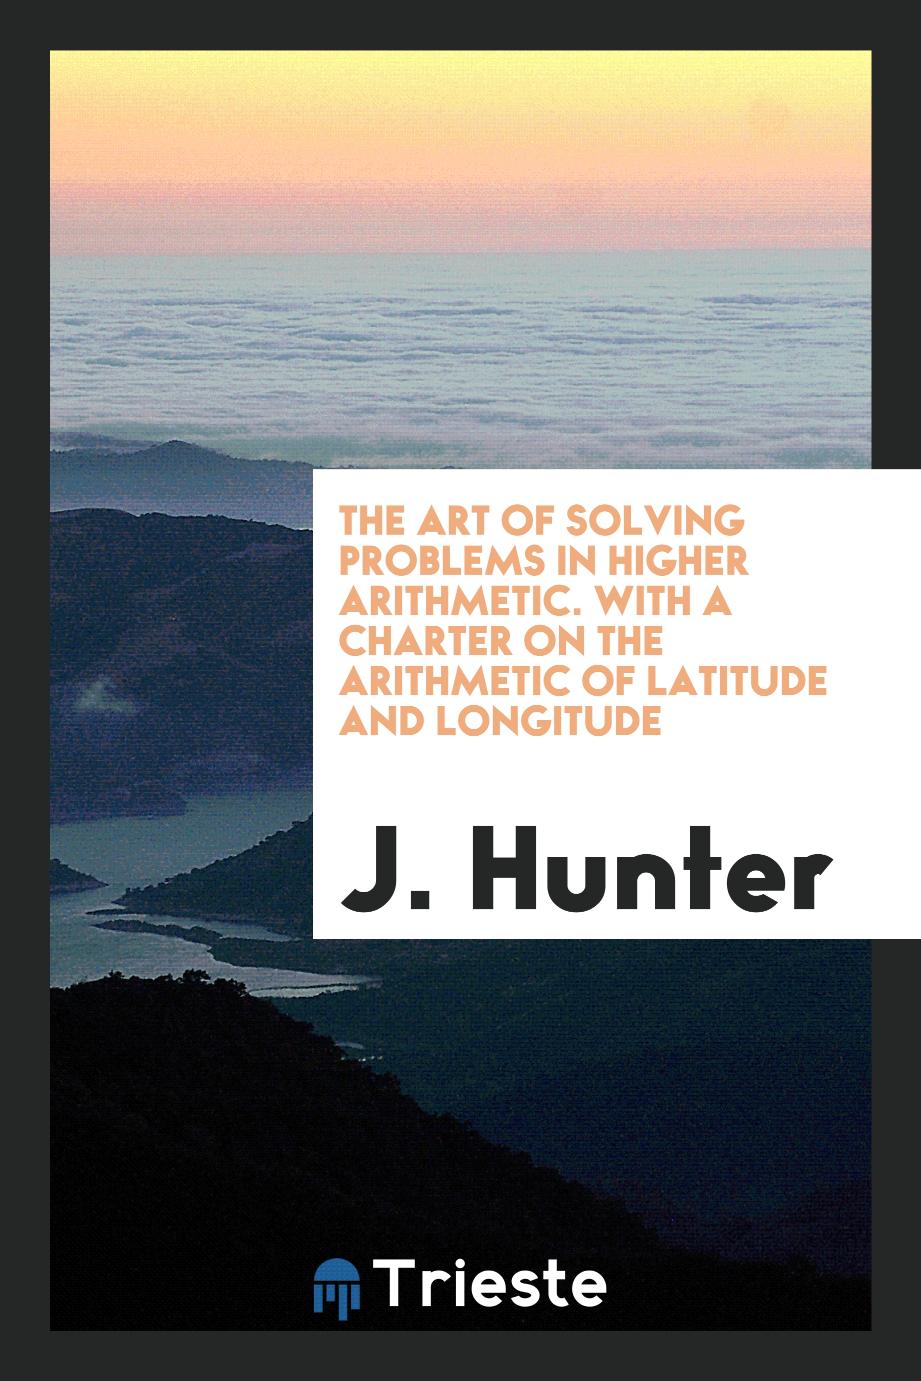 The Art of Solving Problems in Higher Arithmetic. With a Charter on the Arithmetic of Latitude and Longitude